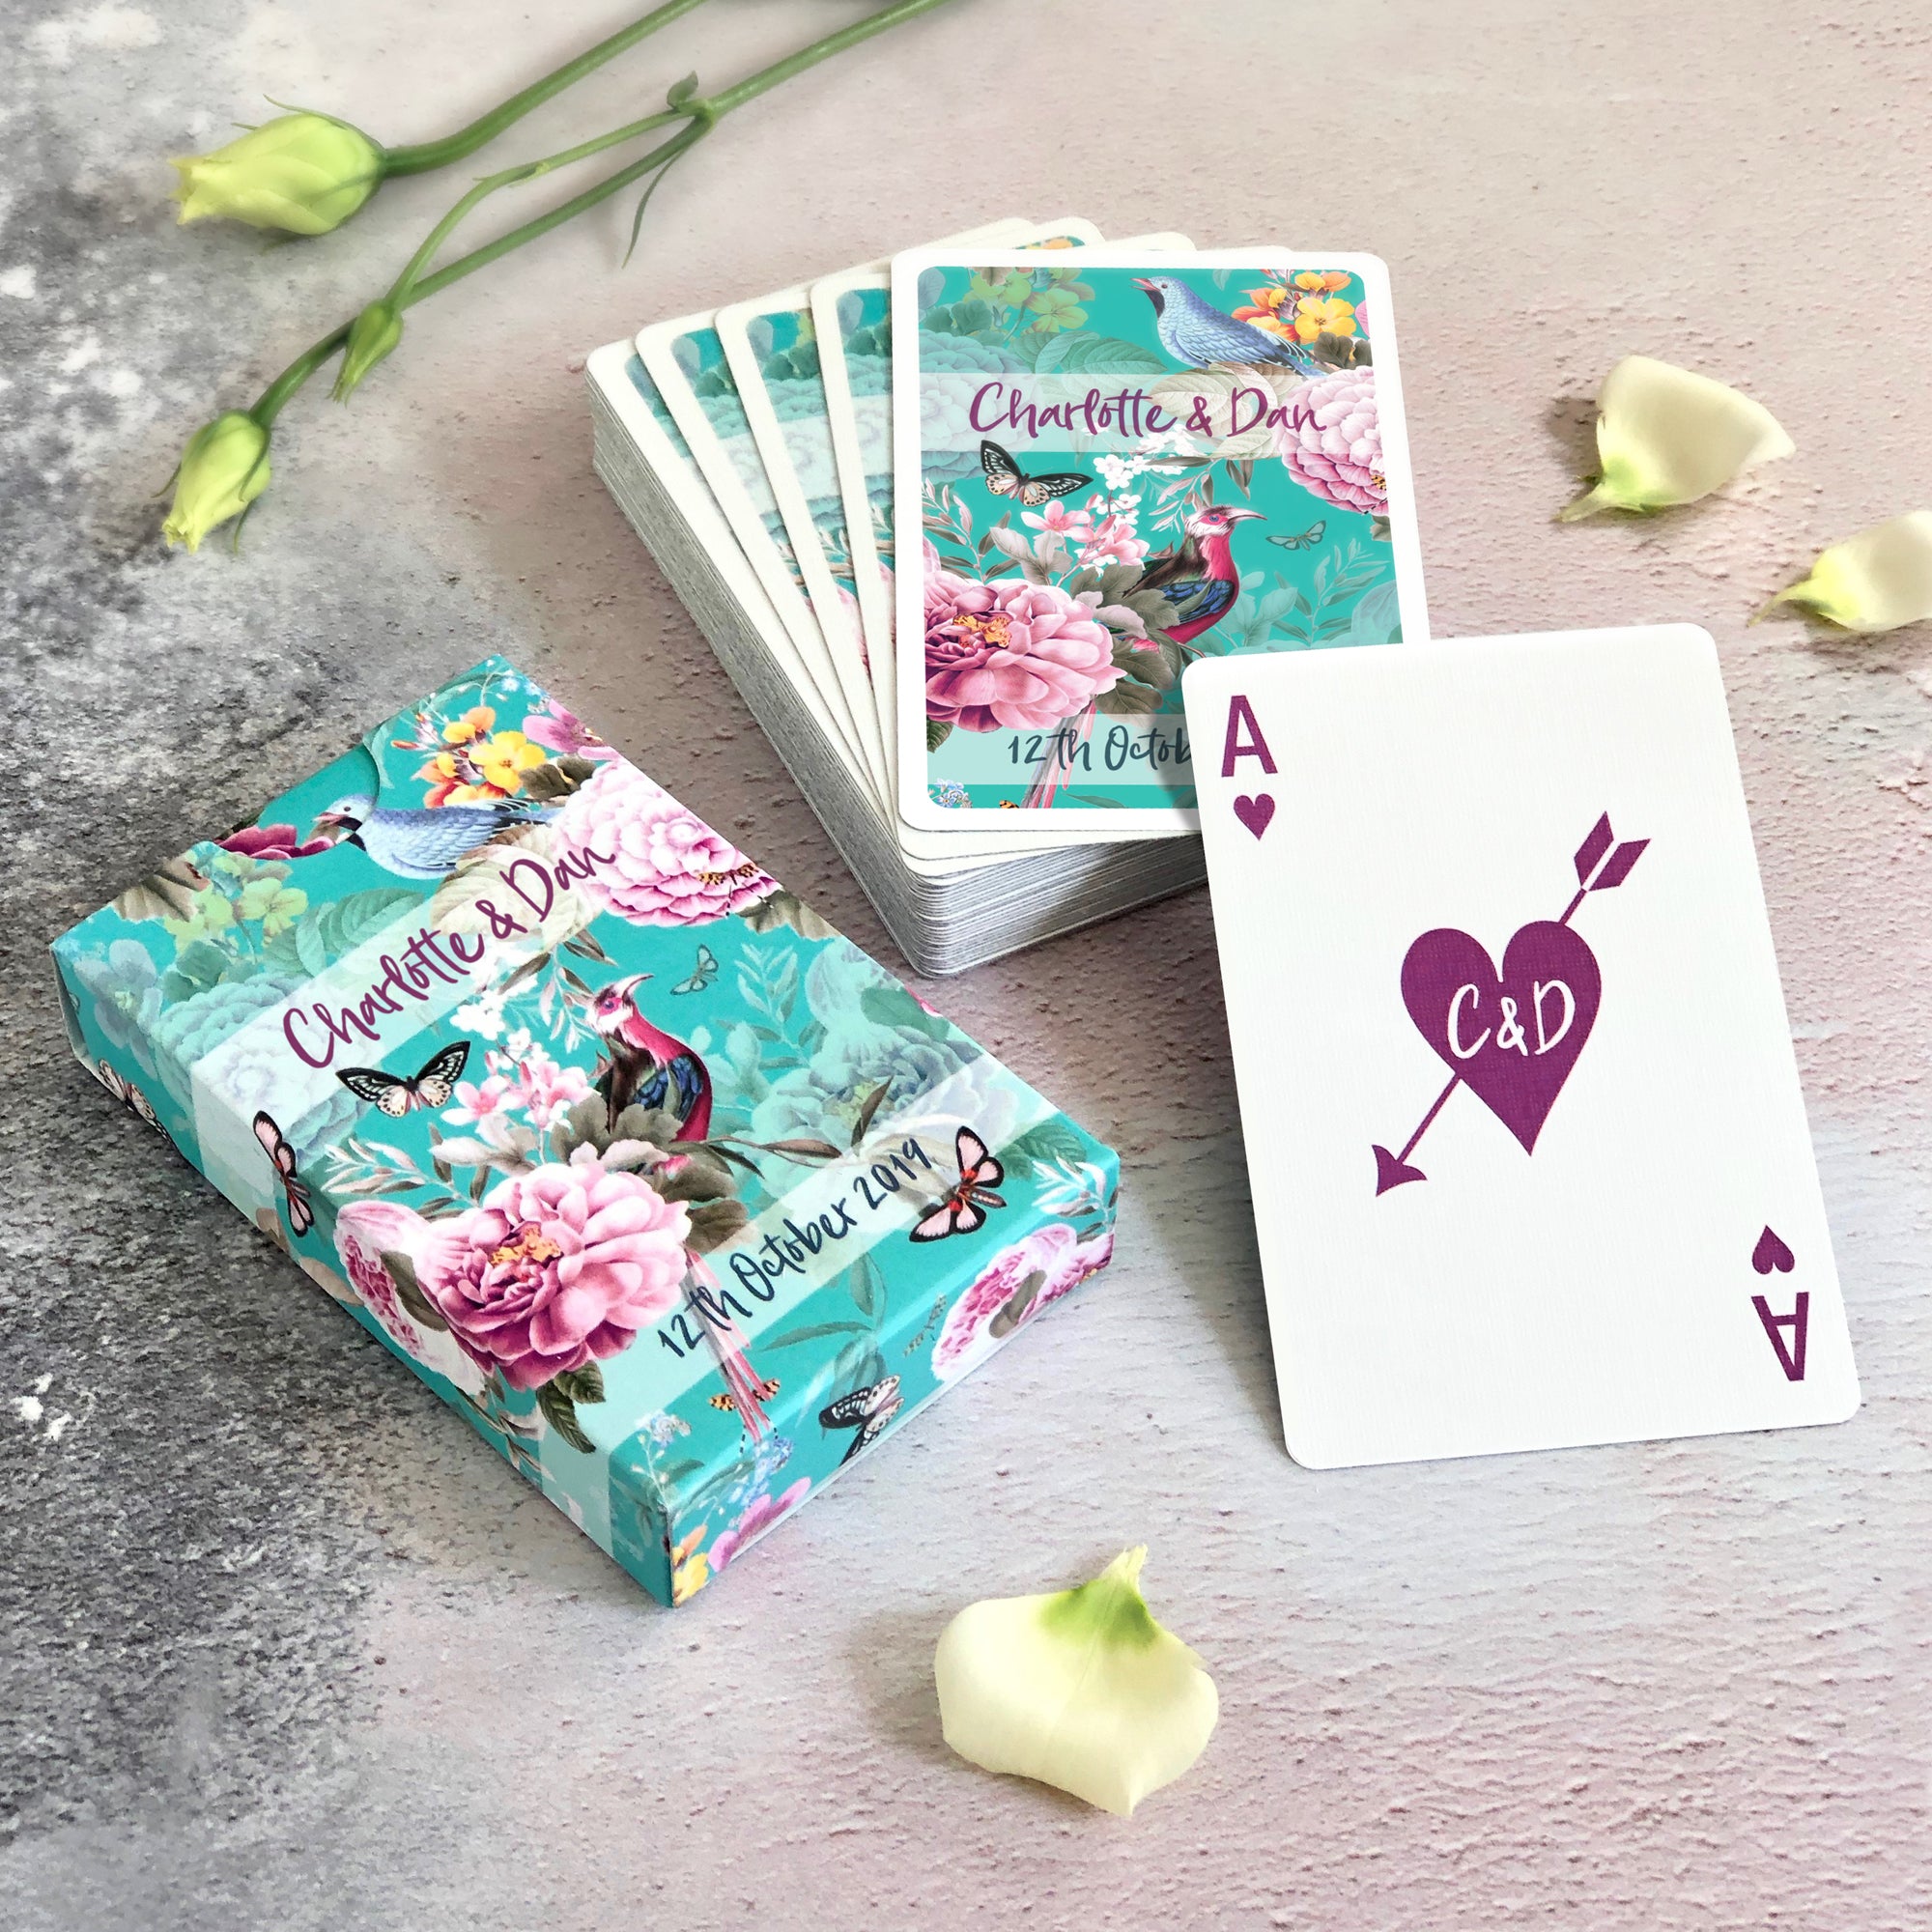 Personalised playing cards with a botanical theme